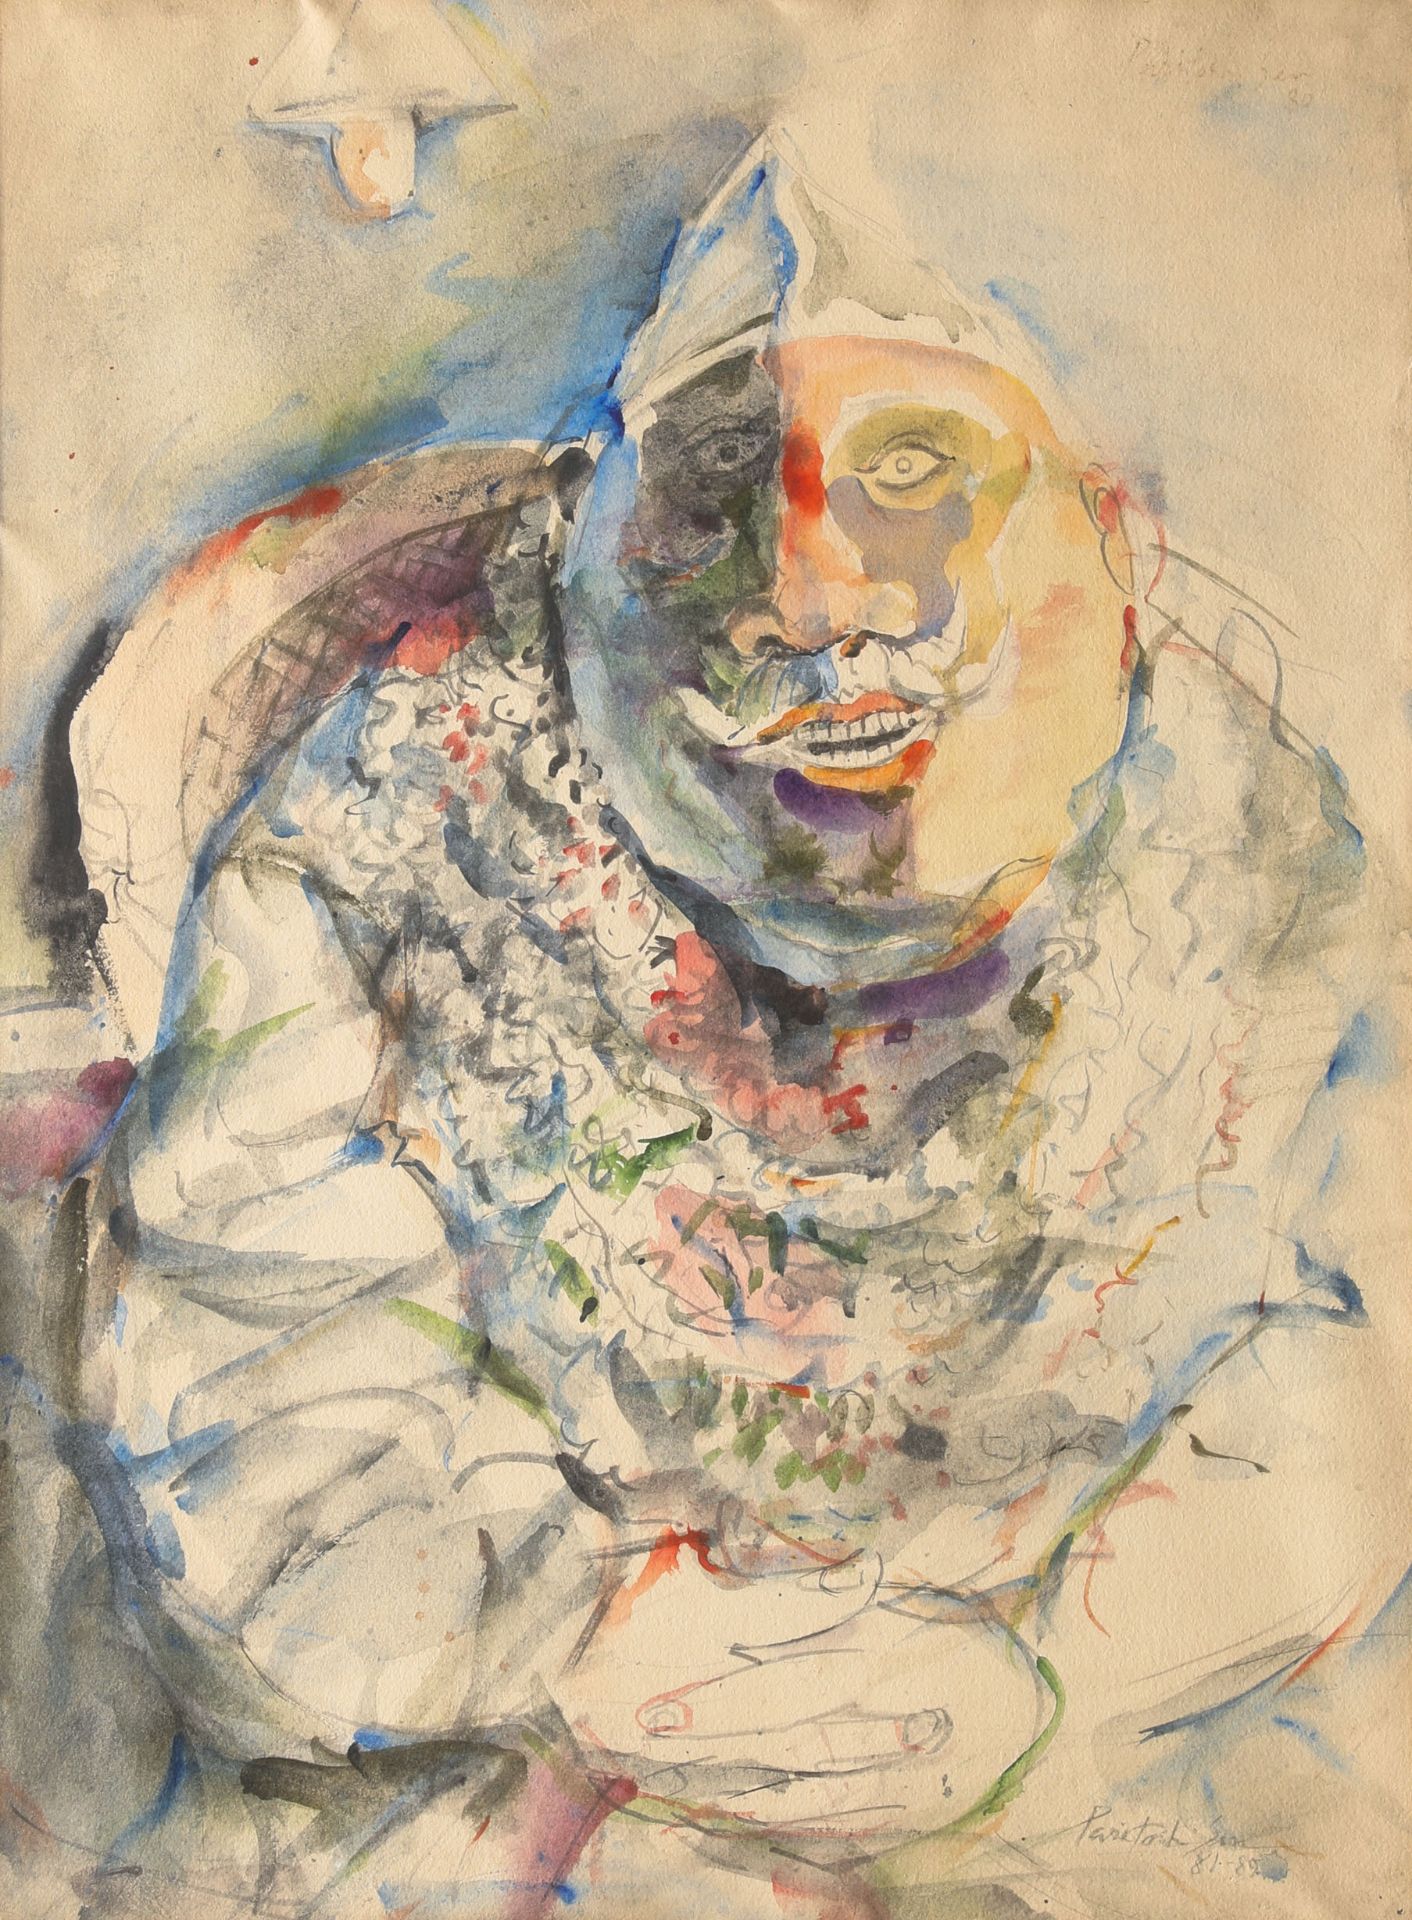 Paritosh Sen, The Man with the Garlands, 1981-89, Acrylic as watercolor/paper - Image 2 of 5